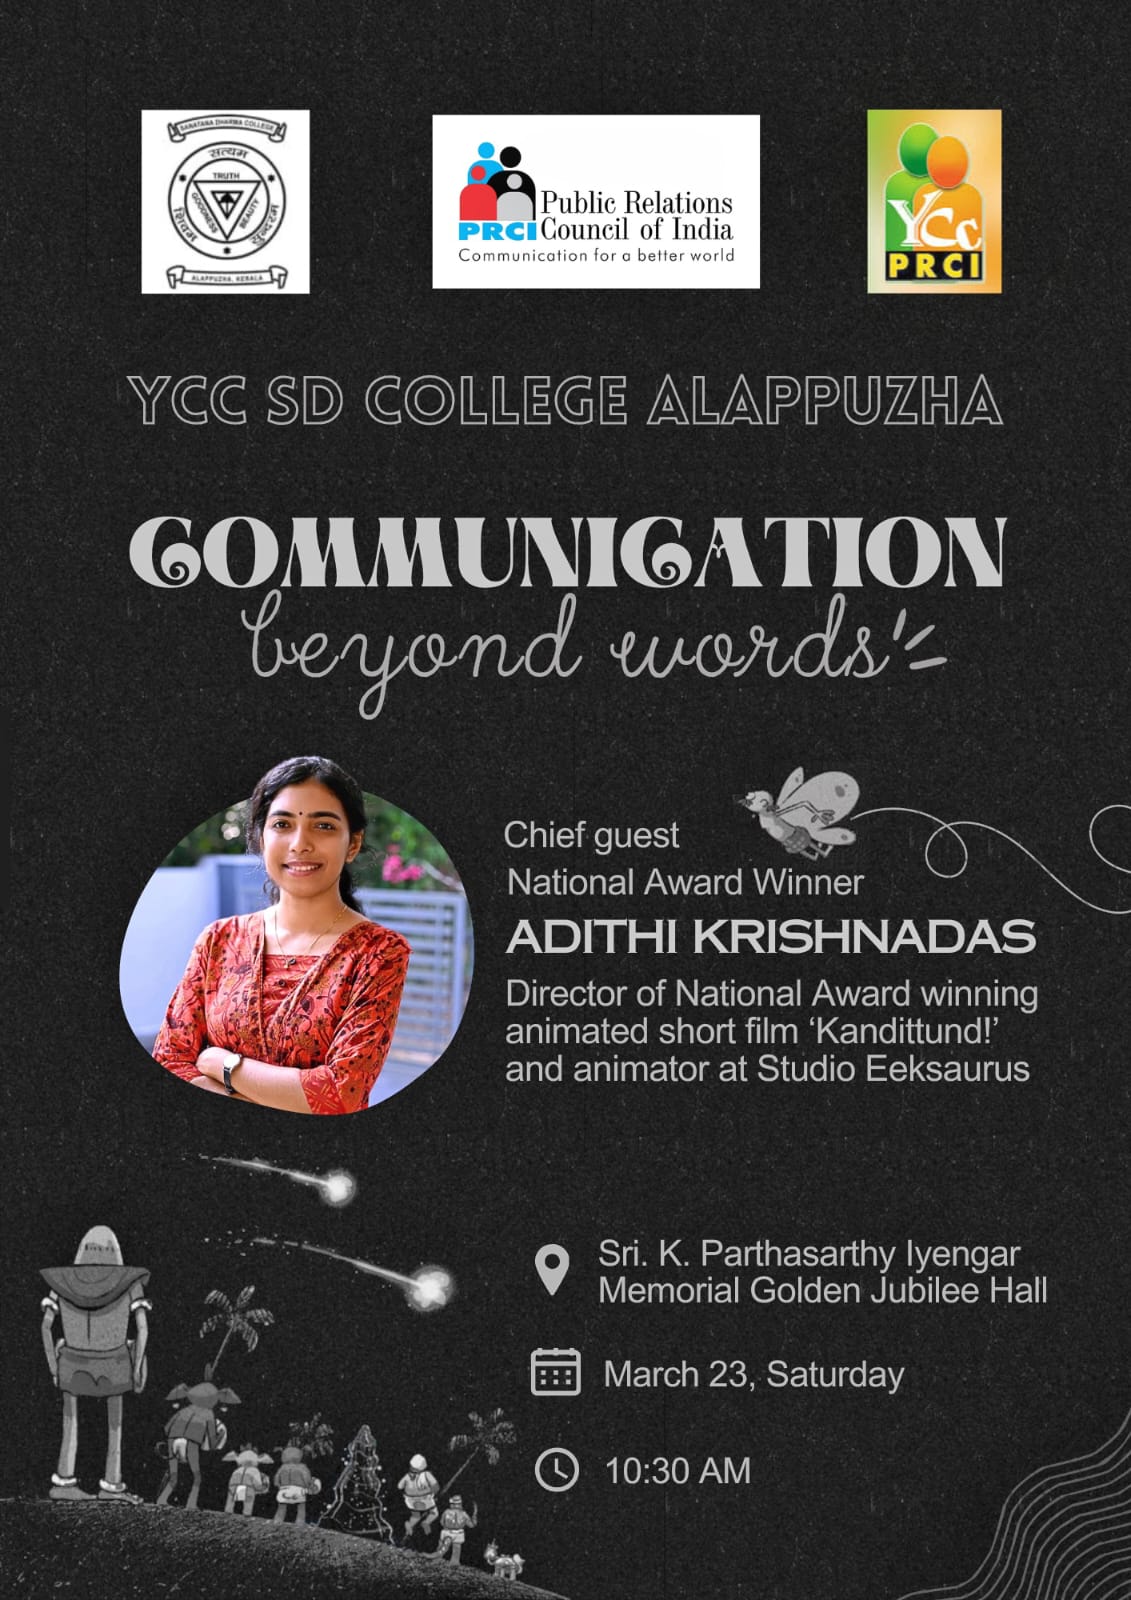 ‘Communication beyond words” programme by Young Communicators Club